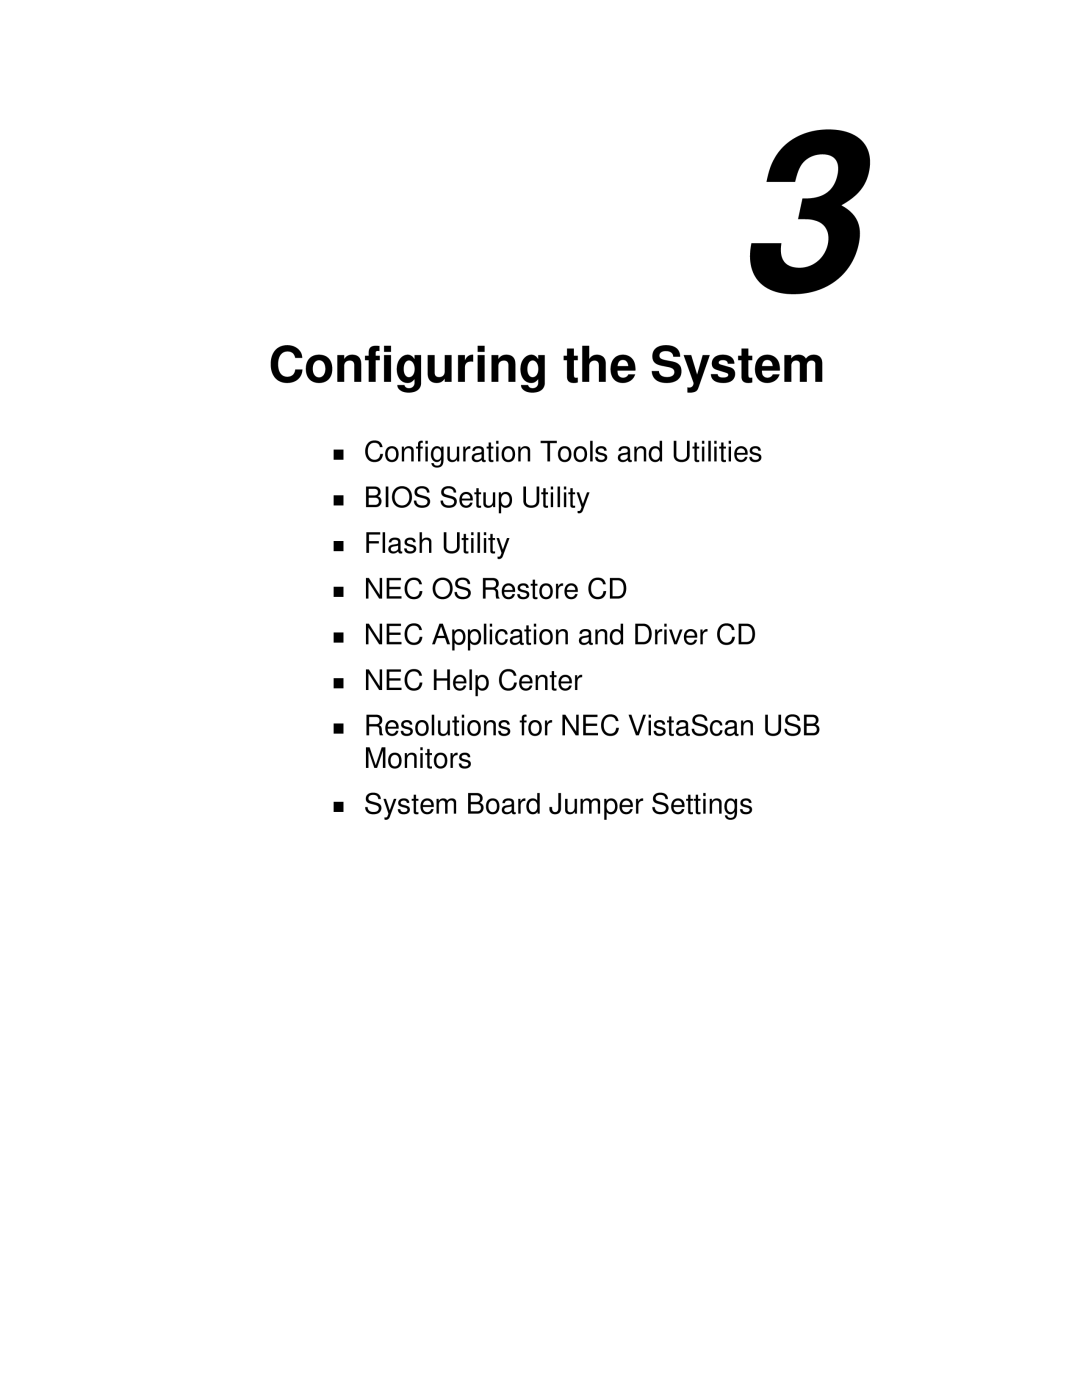 NEC VT 300 Series manual Configuring the System, Configuration Tools and Utilities, BIOS Setup Utility Flash Utility 